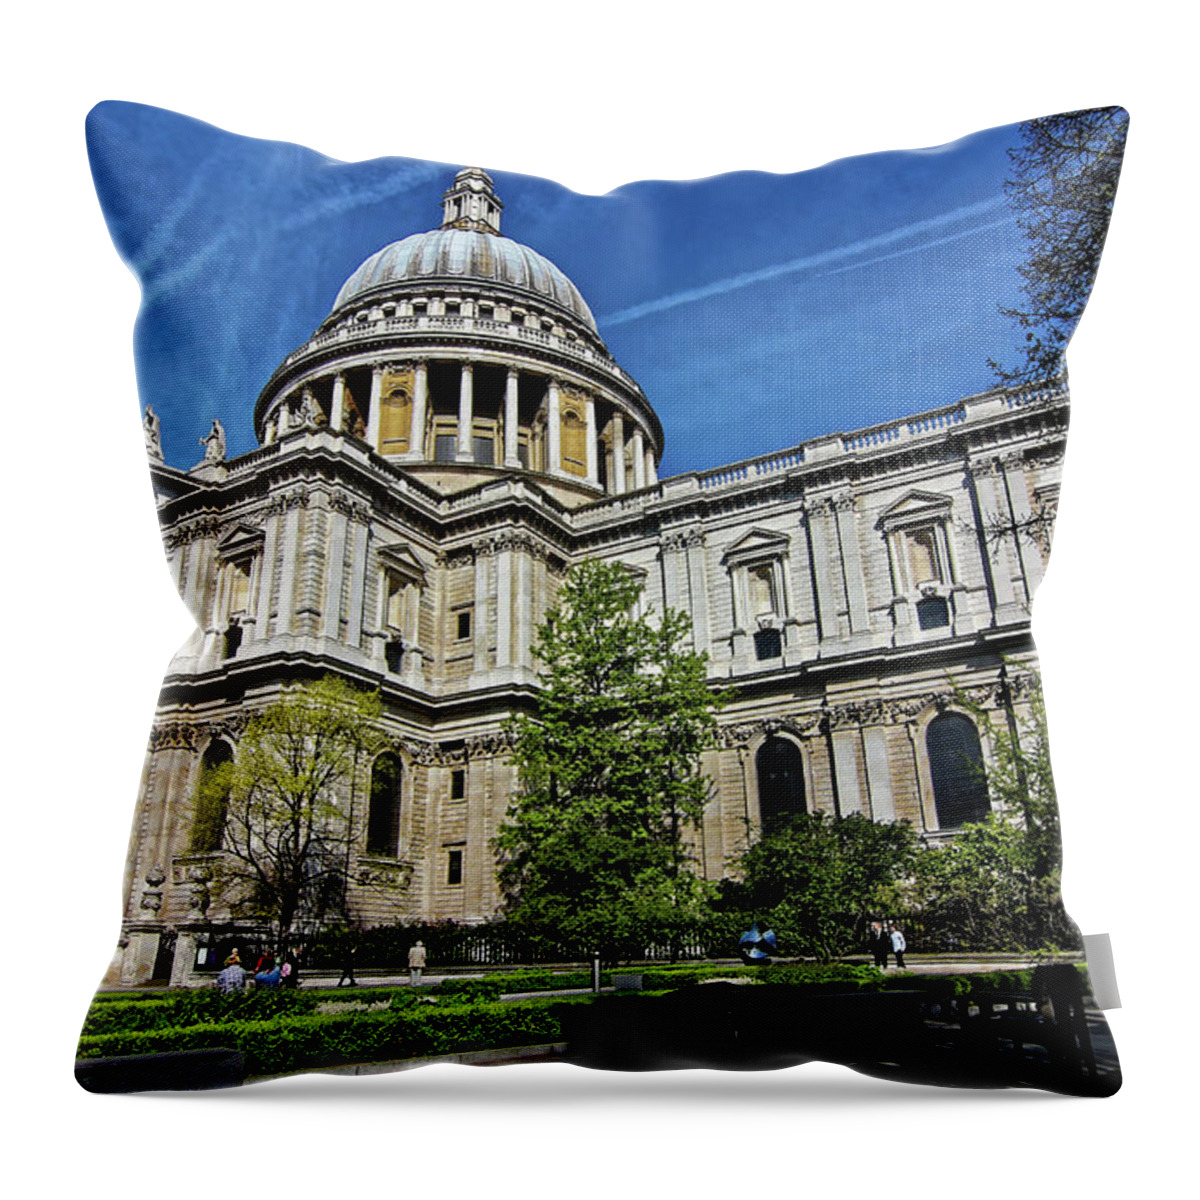 St Paul's Cathedral Throw Pillow featuring the photograph St Paul's Cathedral by Doolittle Photography and Art